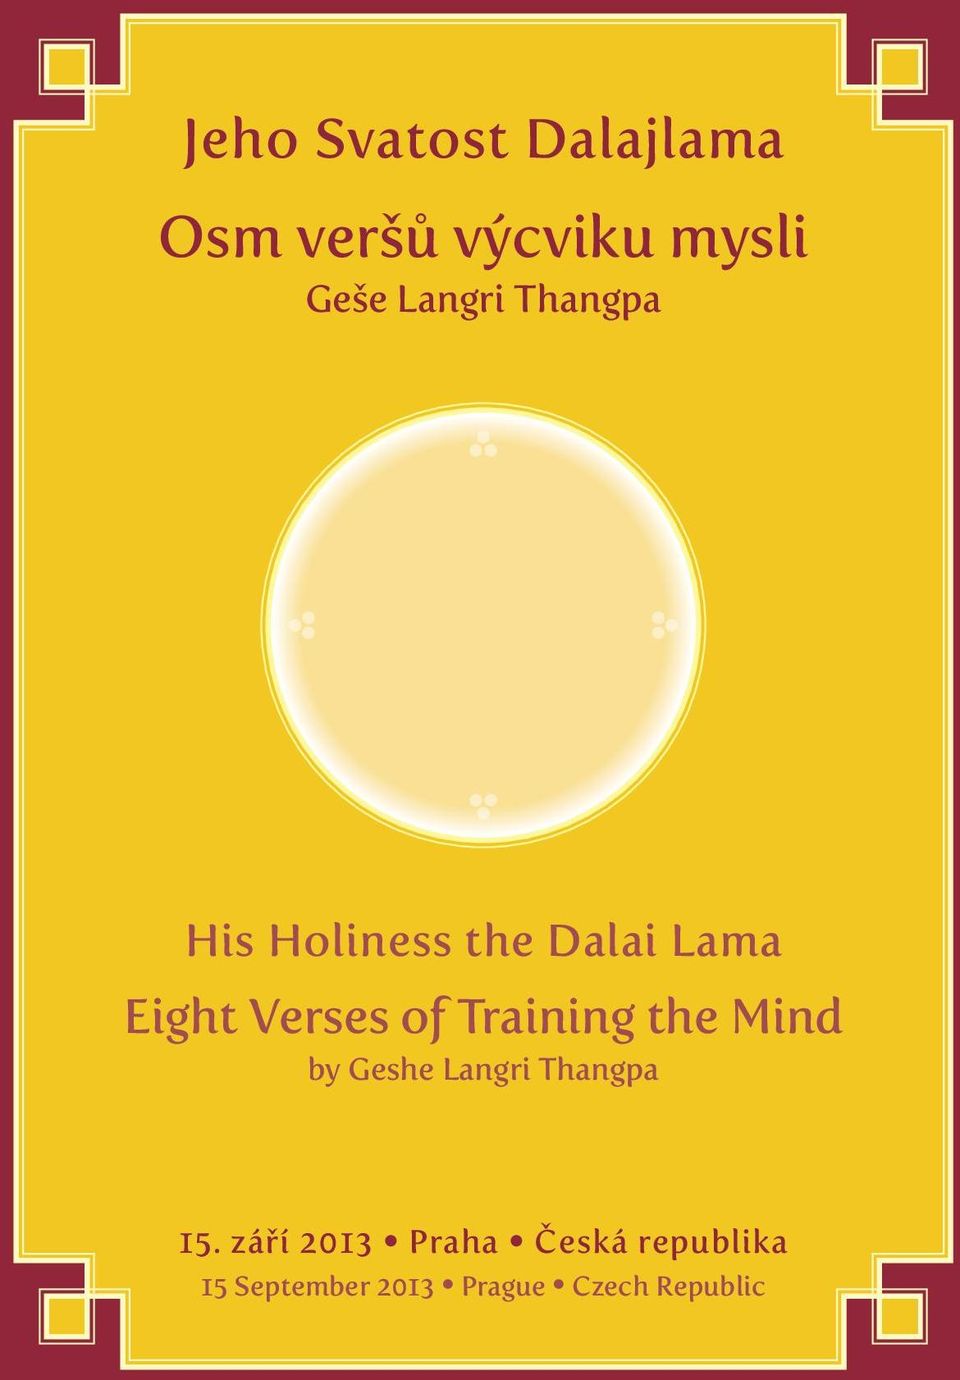 of Training the Mind by Geshe Langri Thangpa 15.